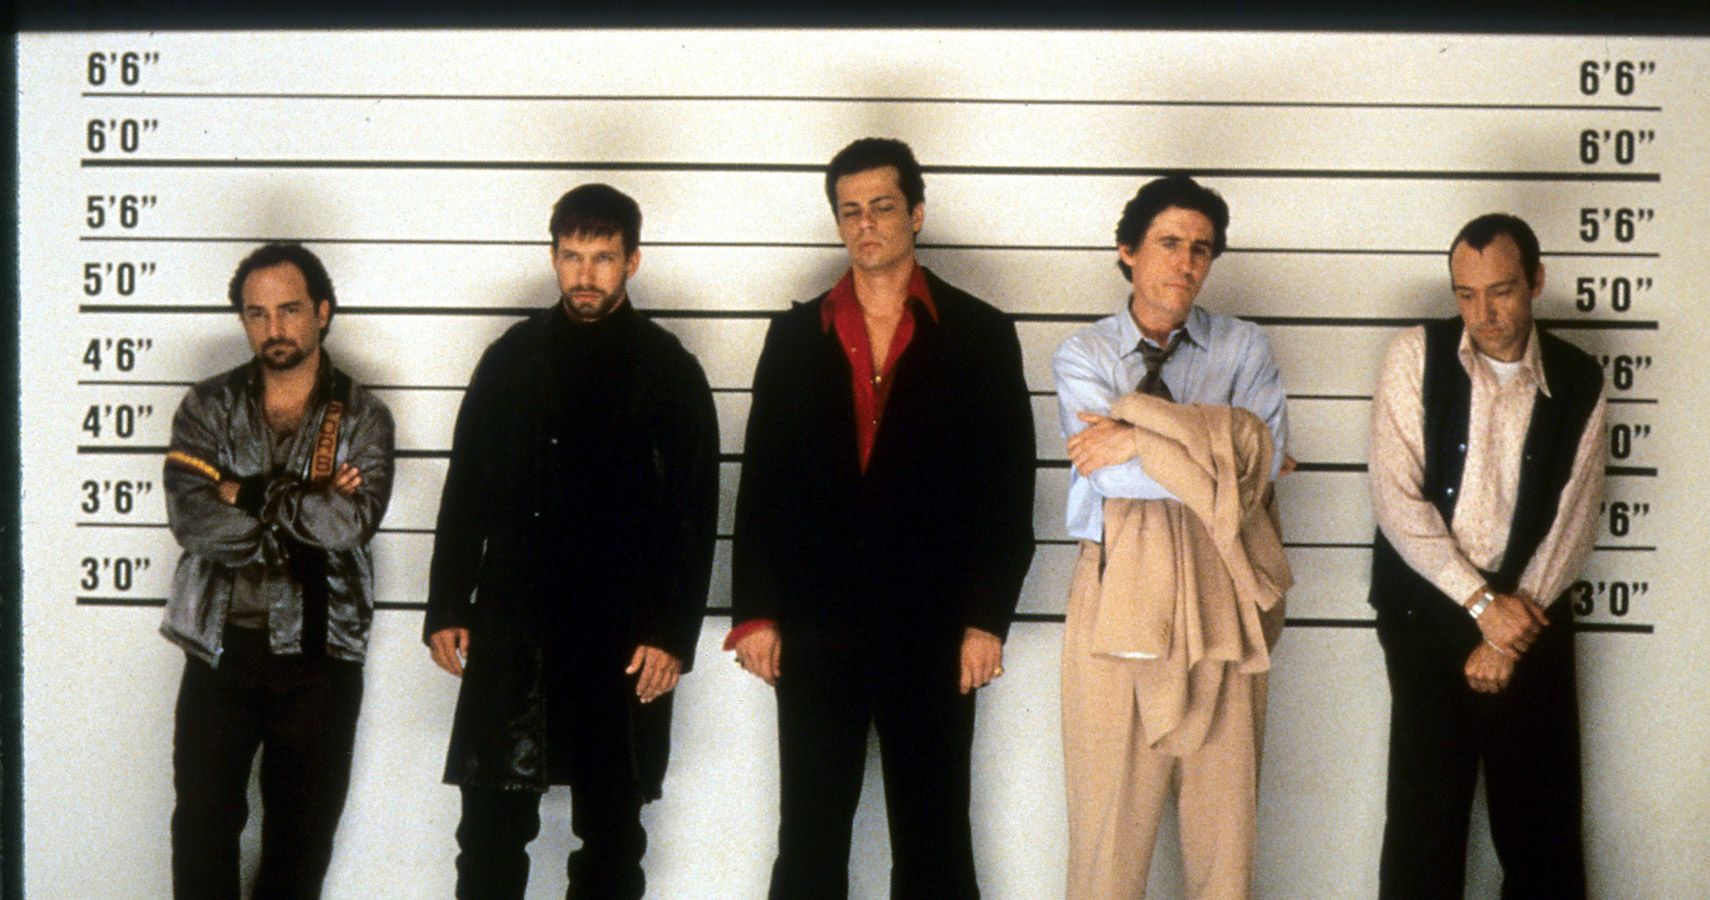 The Usual Suspects 10 Worst Things Keyser Soze Ever Did